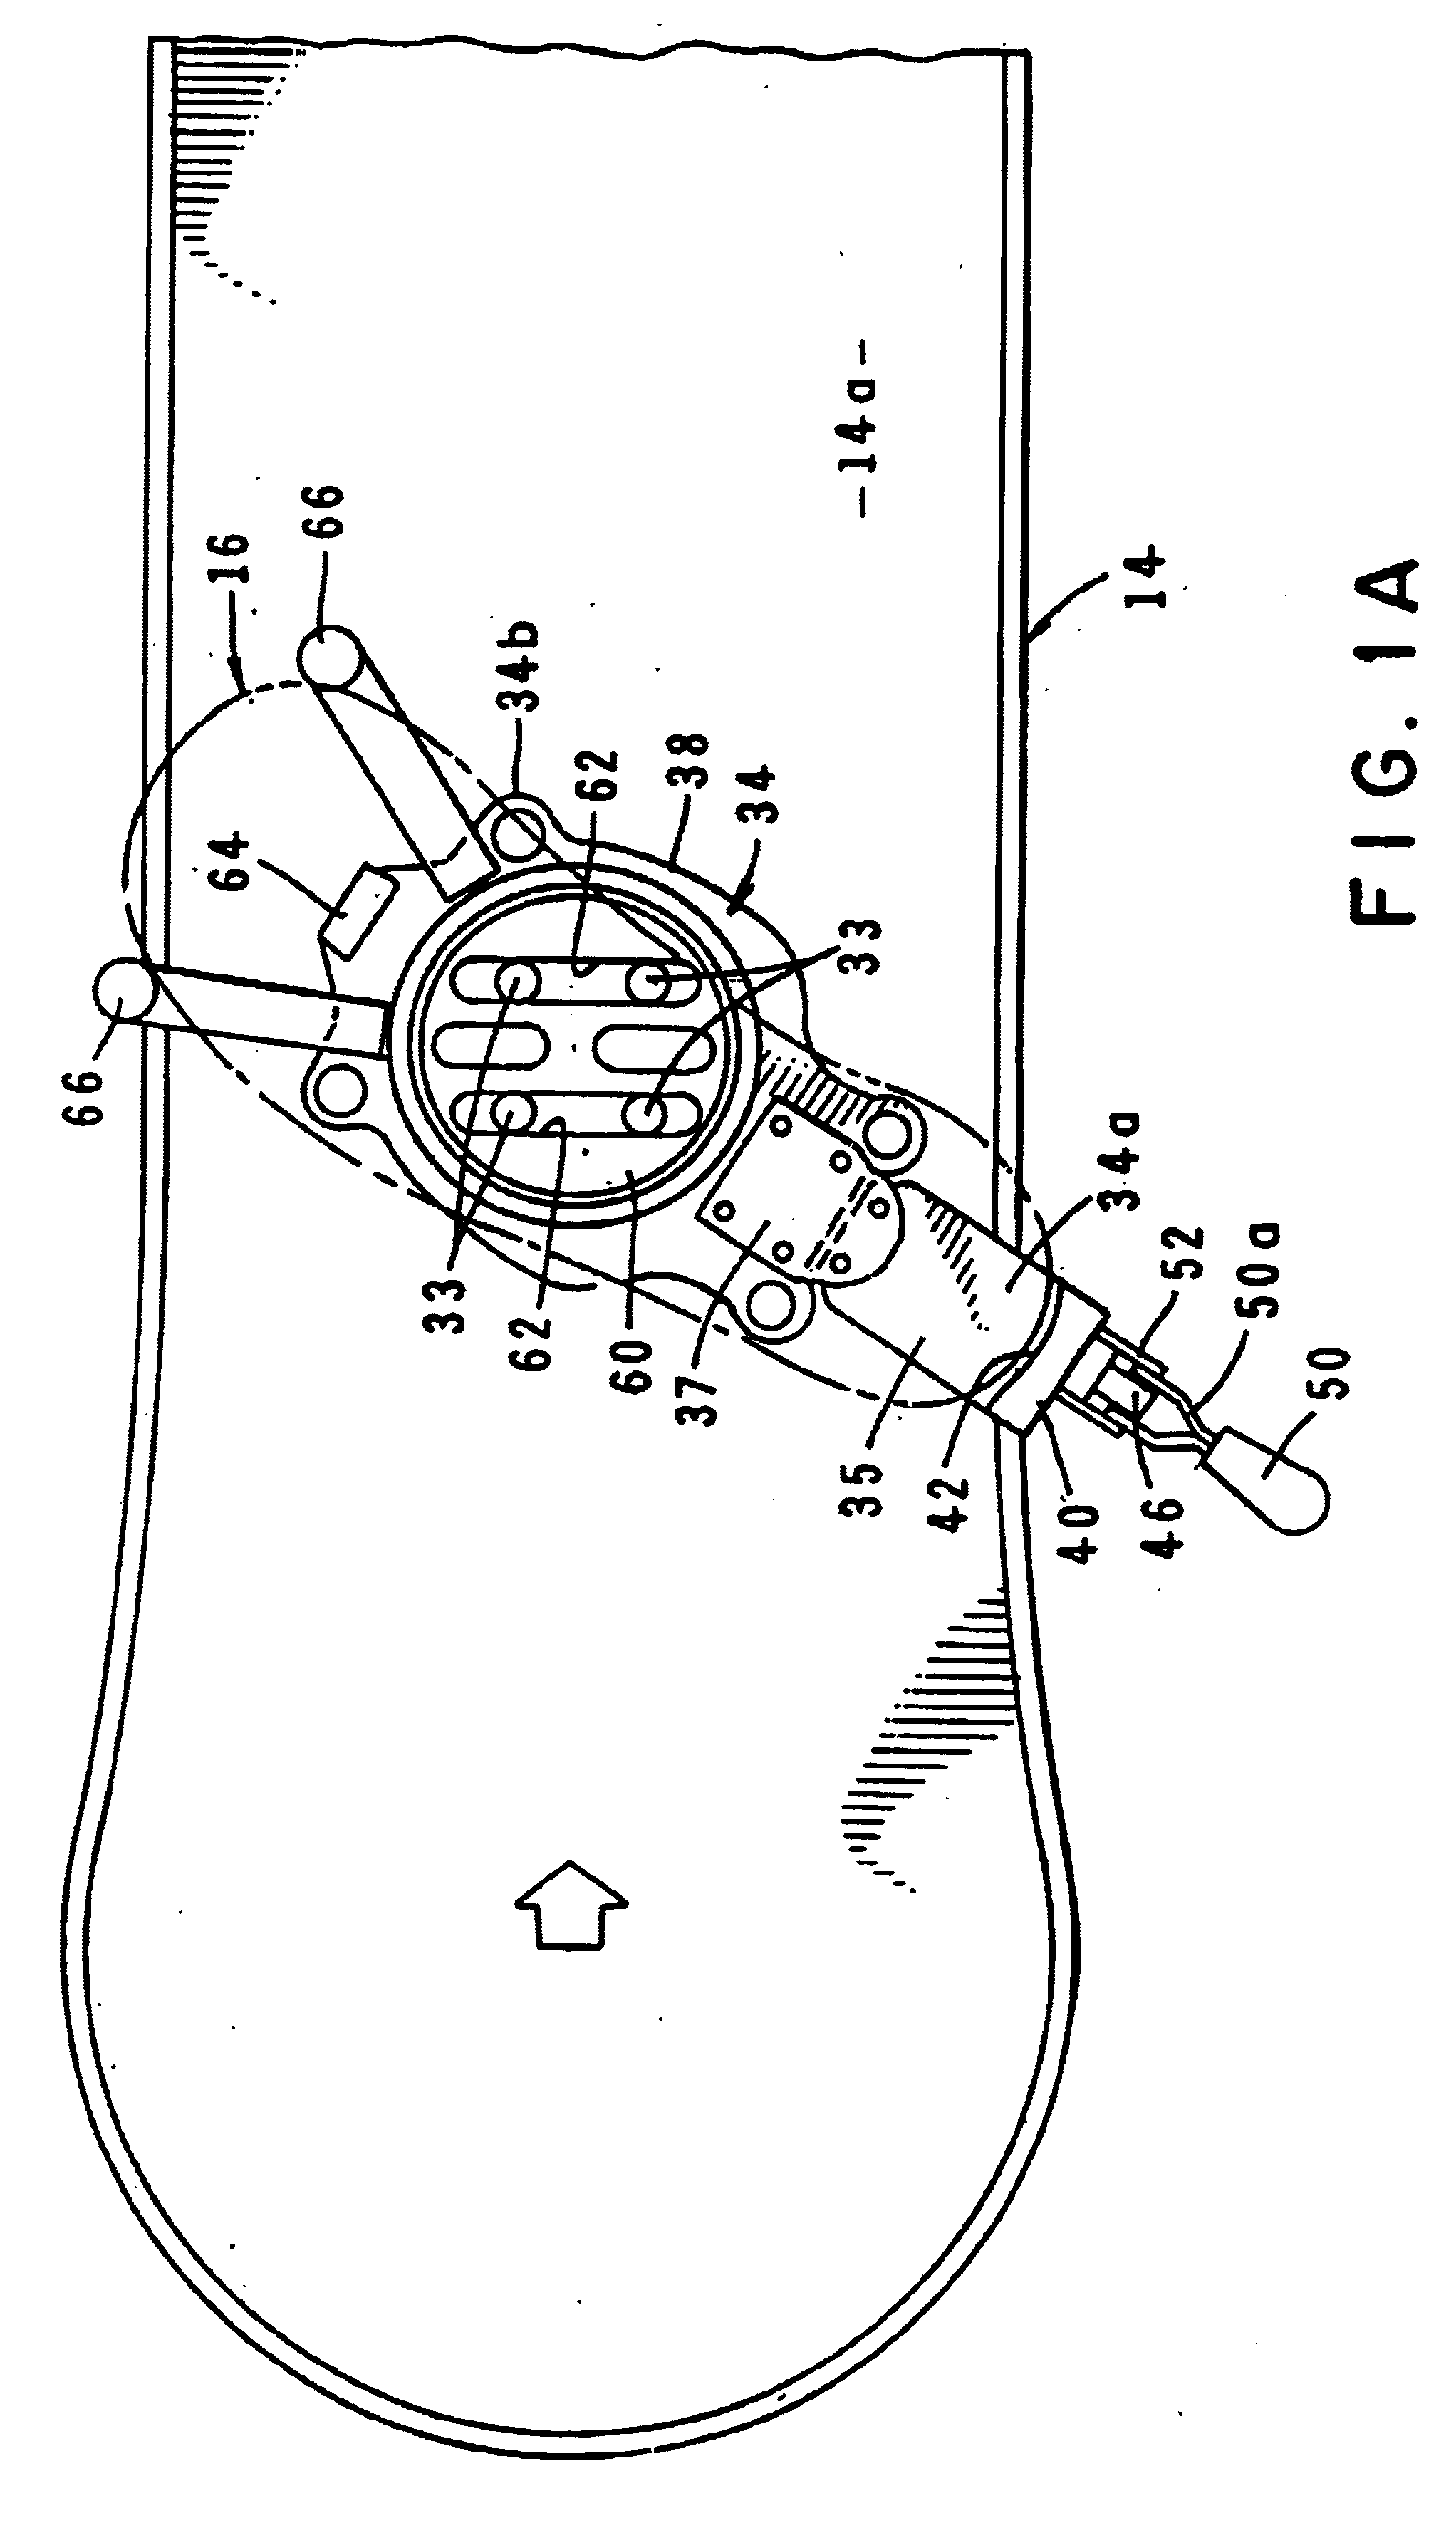 Apparatus for gliding over snow